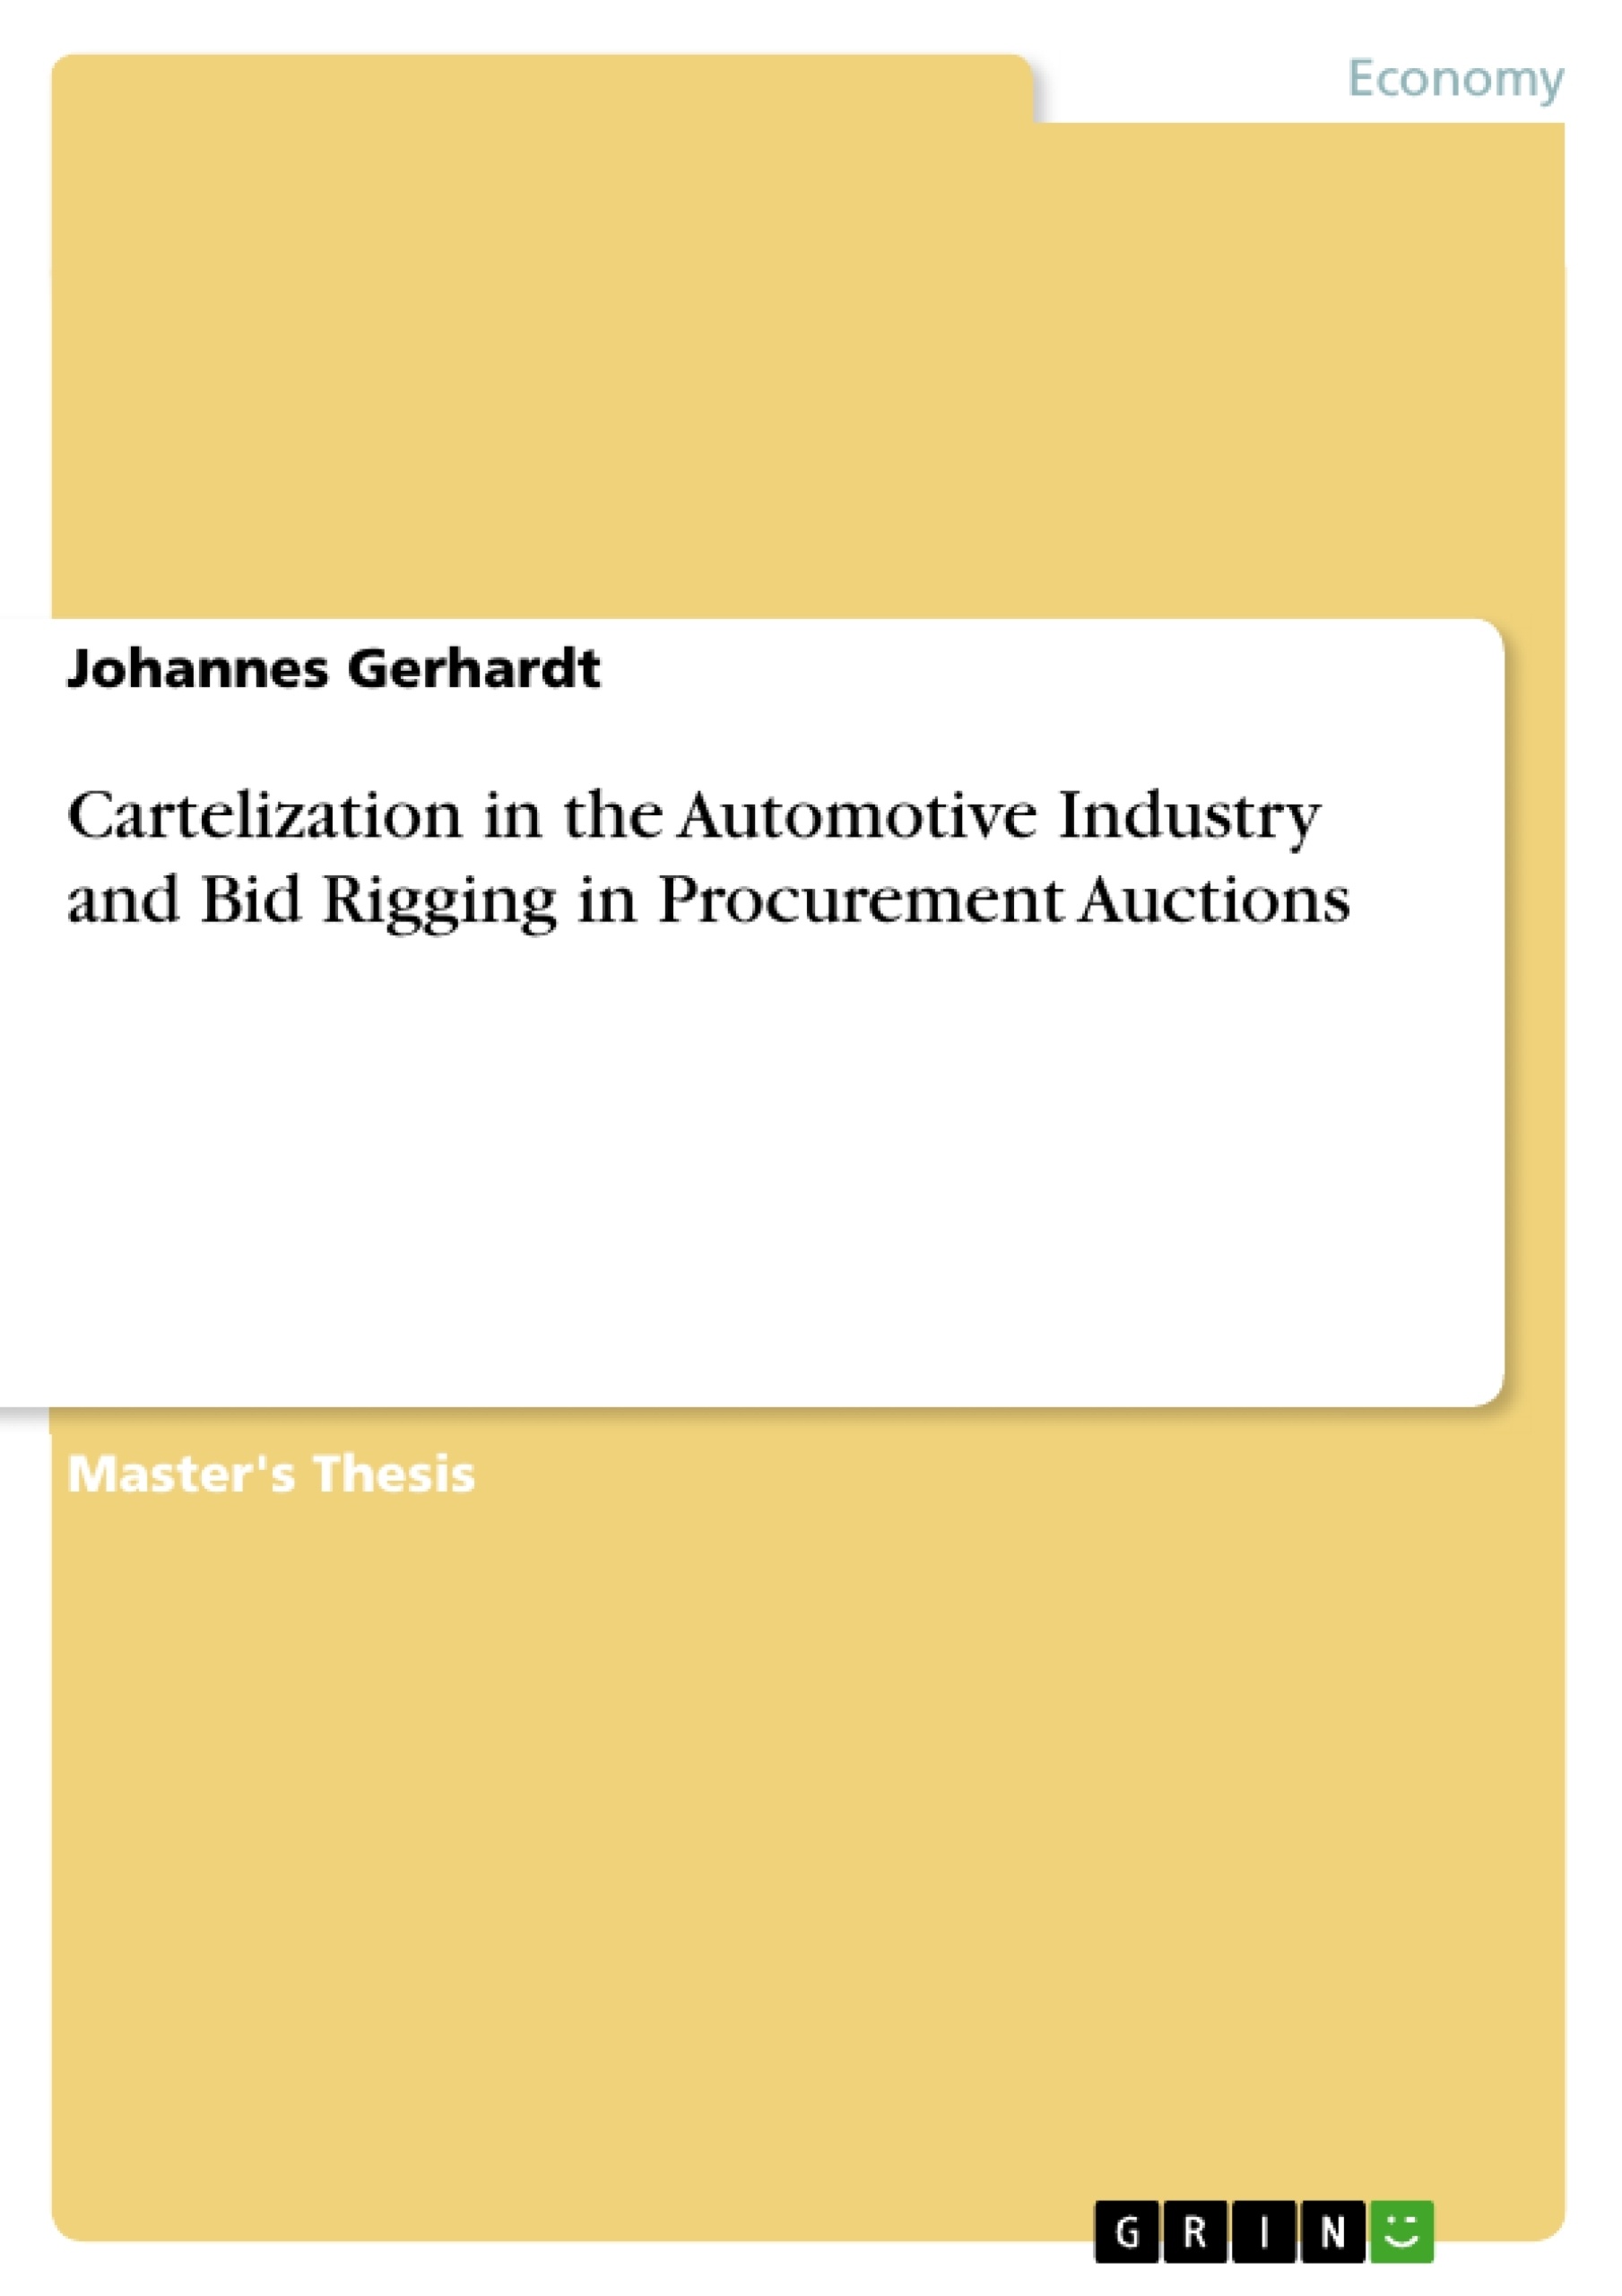 Título: Cartelization in the Automotive Industry and Bid Rigging in Procurement Auctions